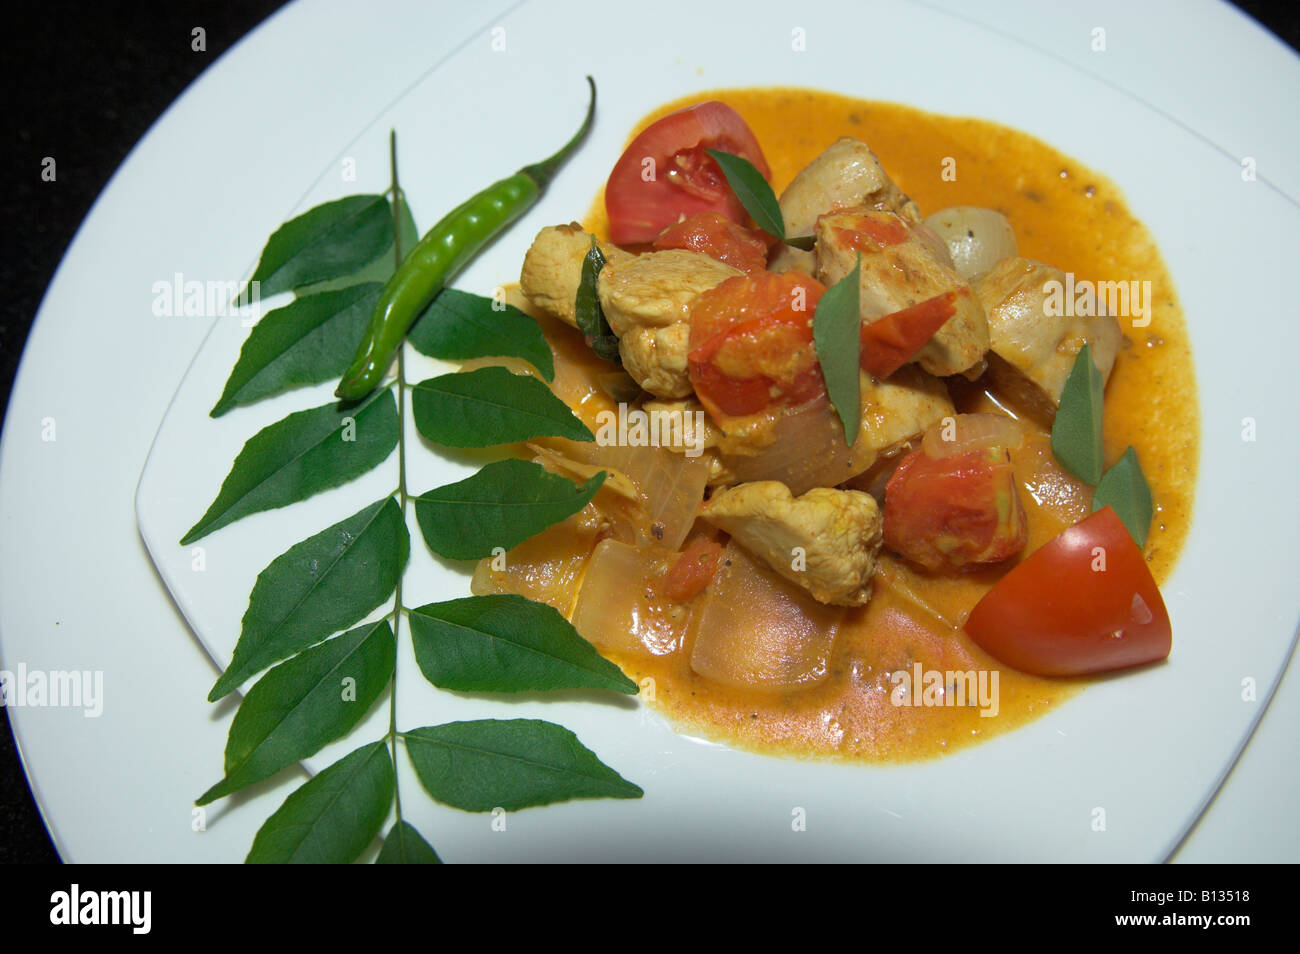 Plate of chicken curry Indian food with garnish ready to serve Stock Photo